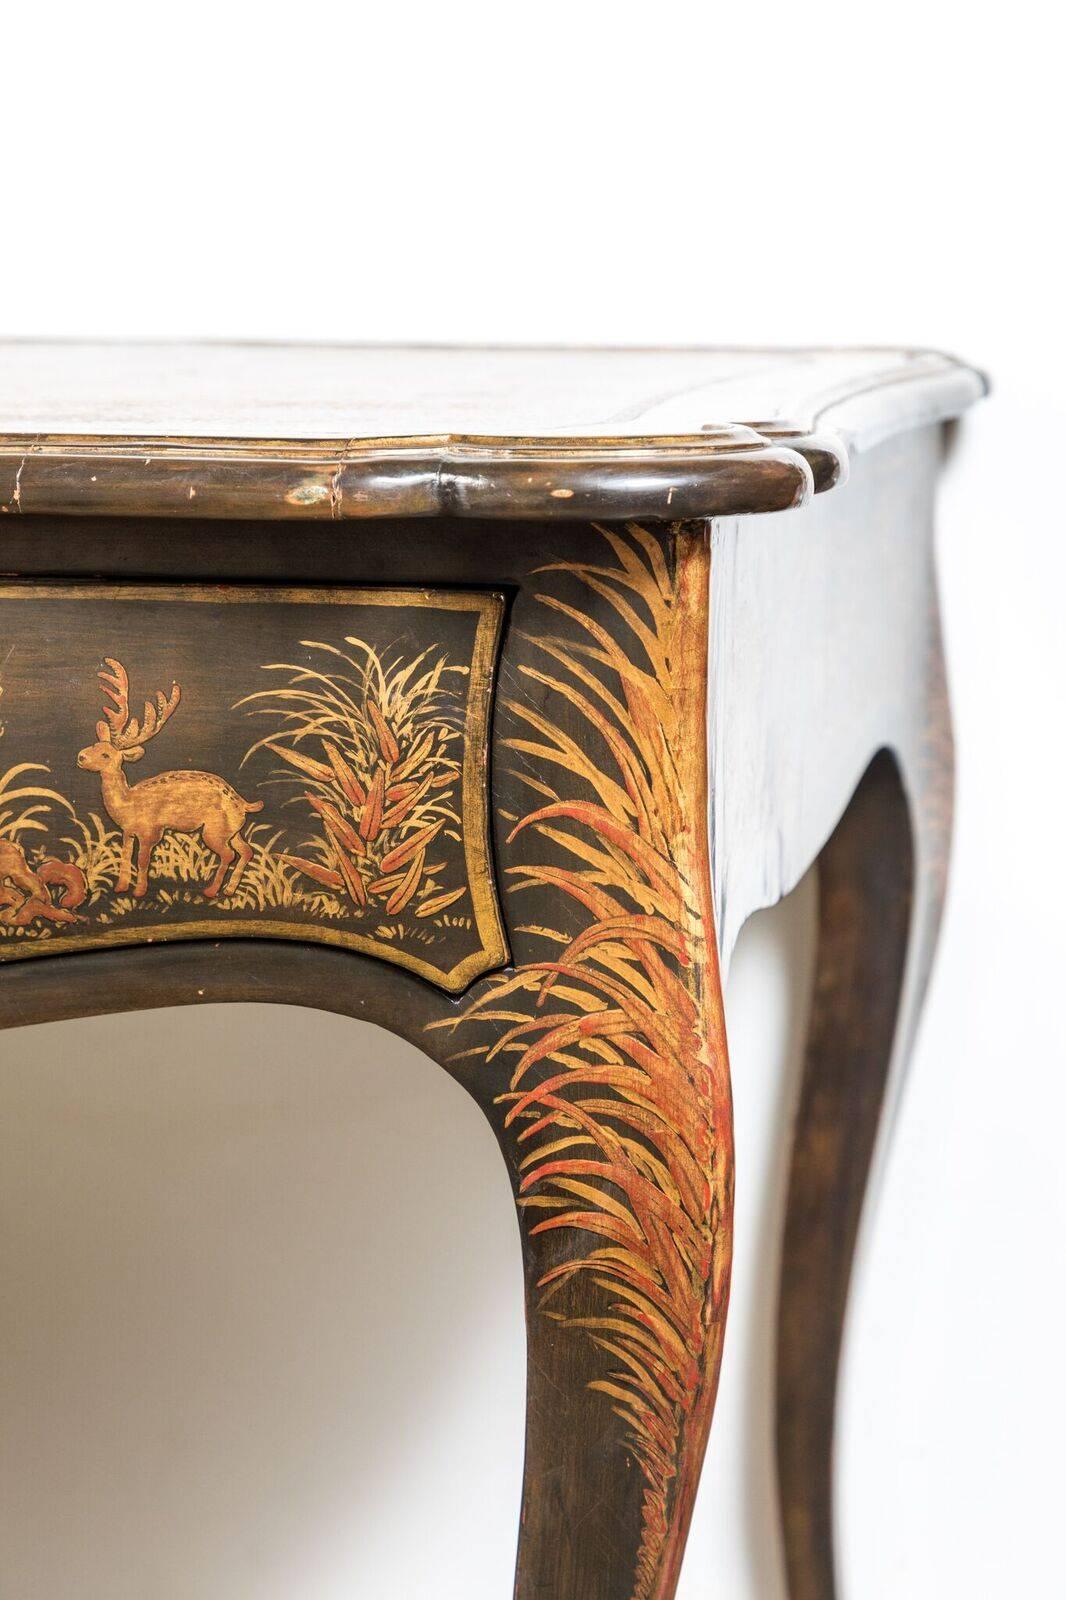 Late 19th Century 19th Century, Hand-Painted, Chinoiserie Desk